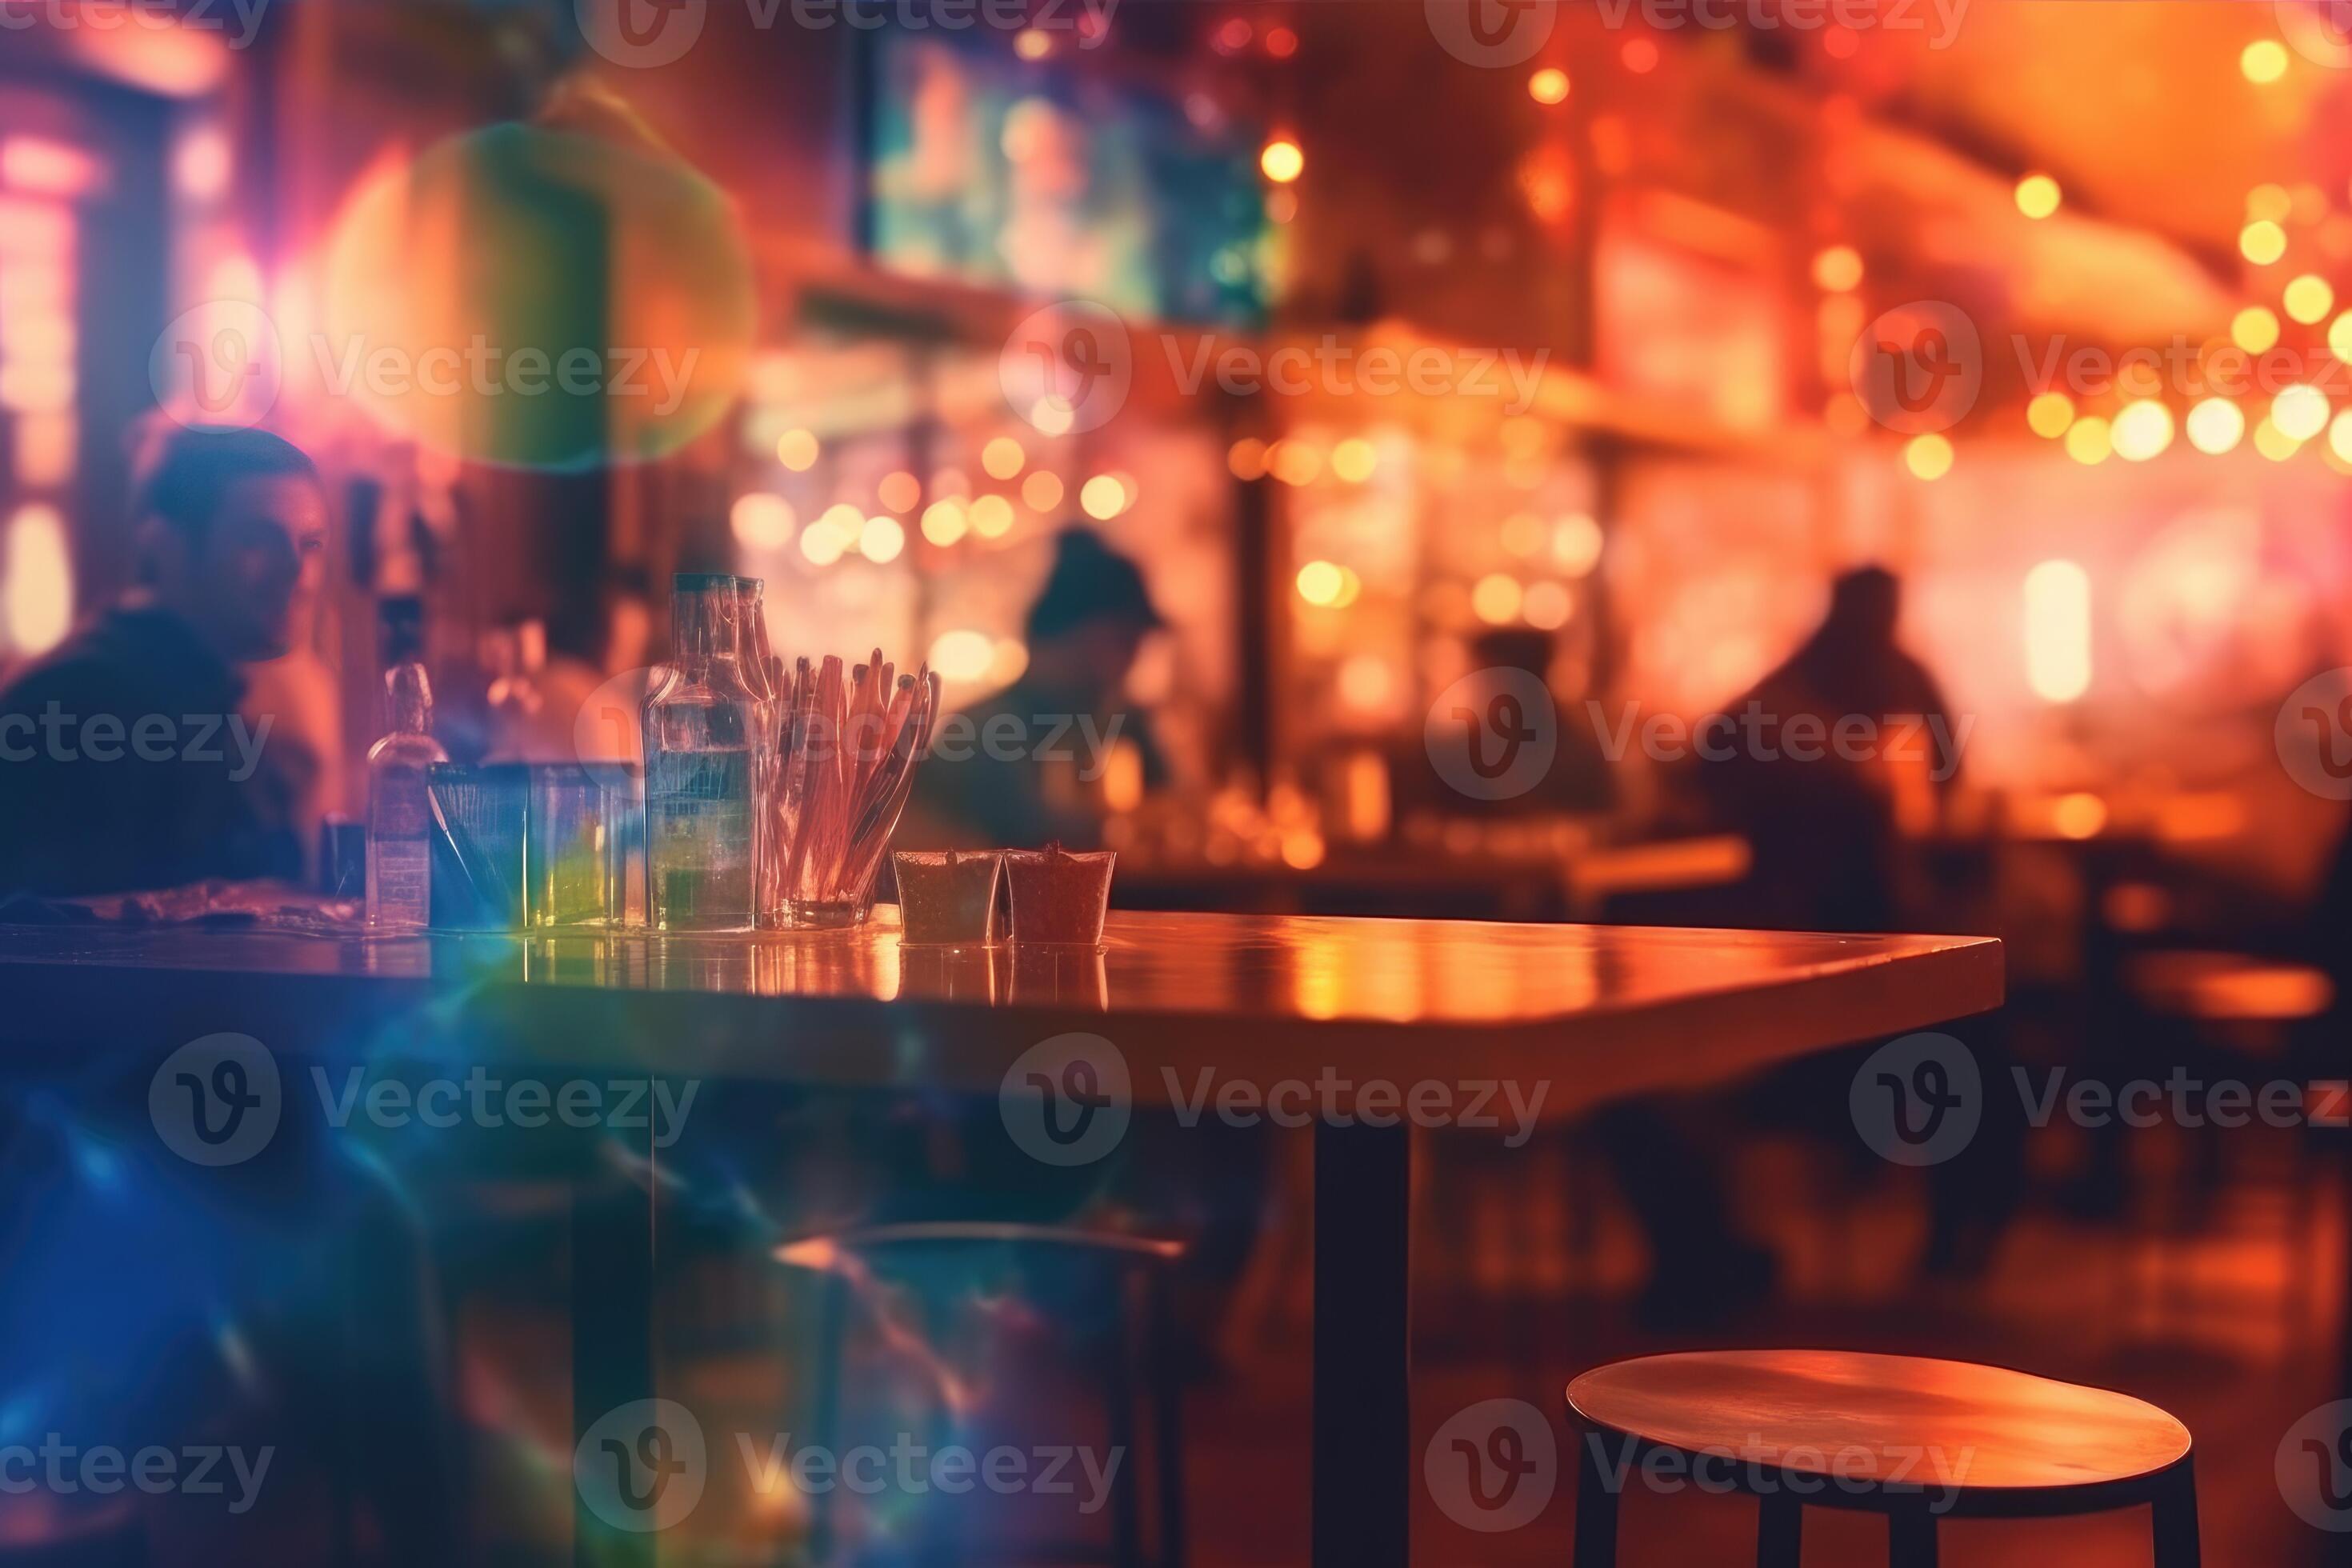 Wooden table with a view of blurred beverages bar backdrop - Stock Image -  Everypixel